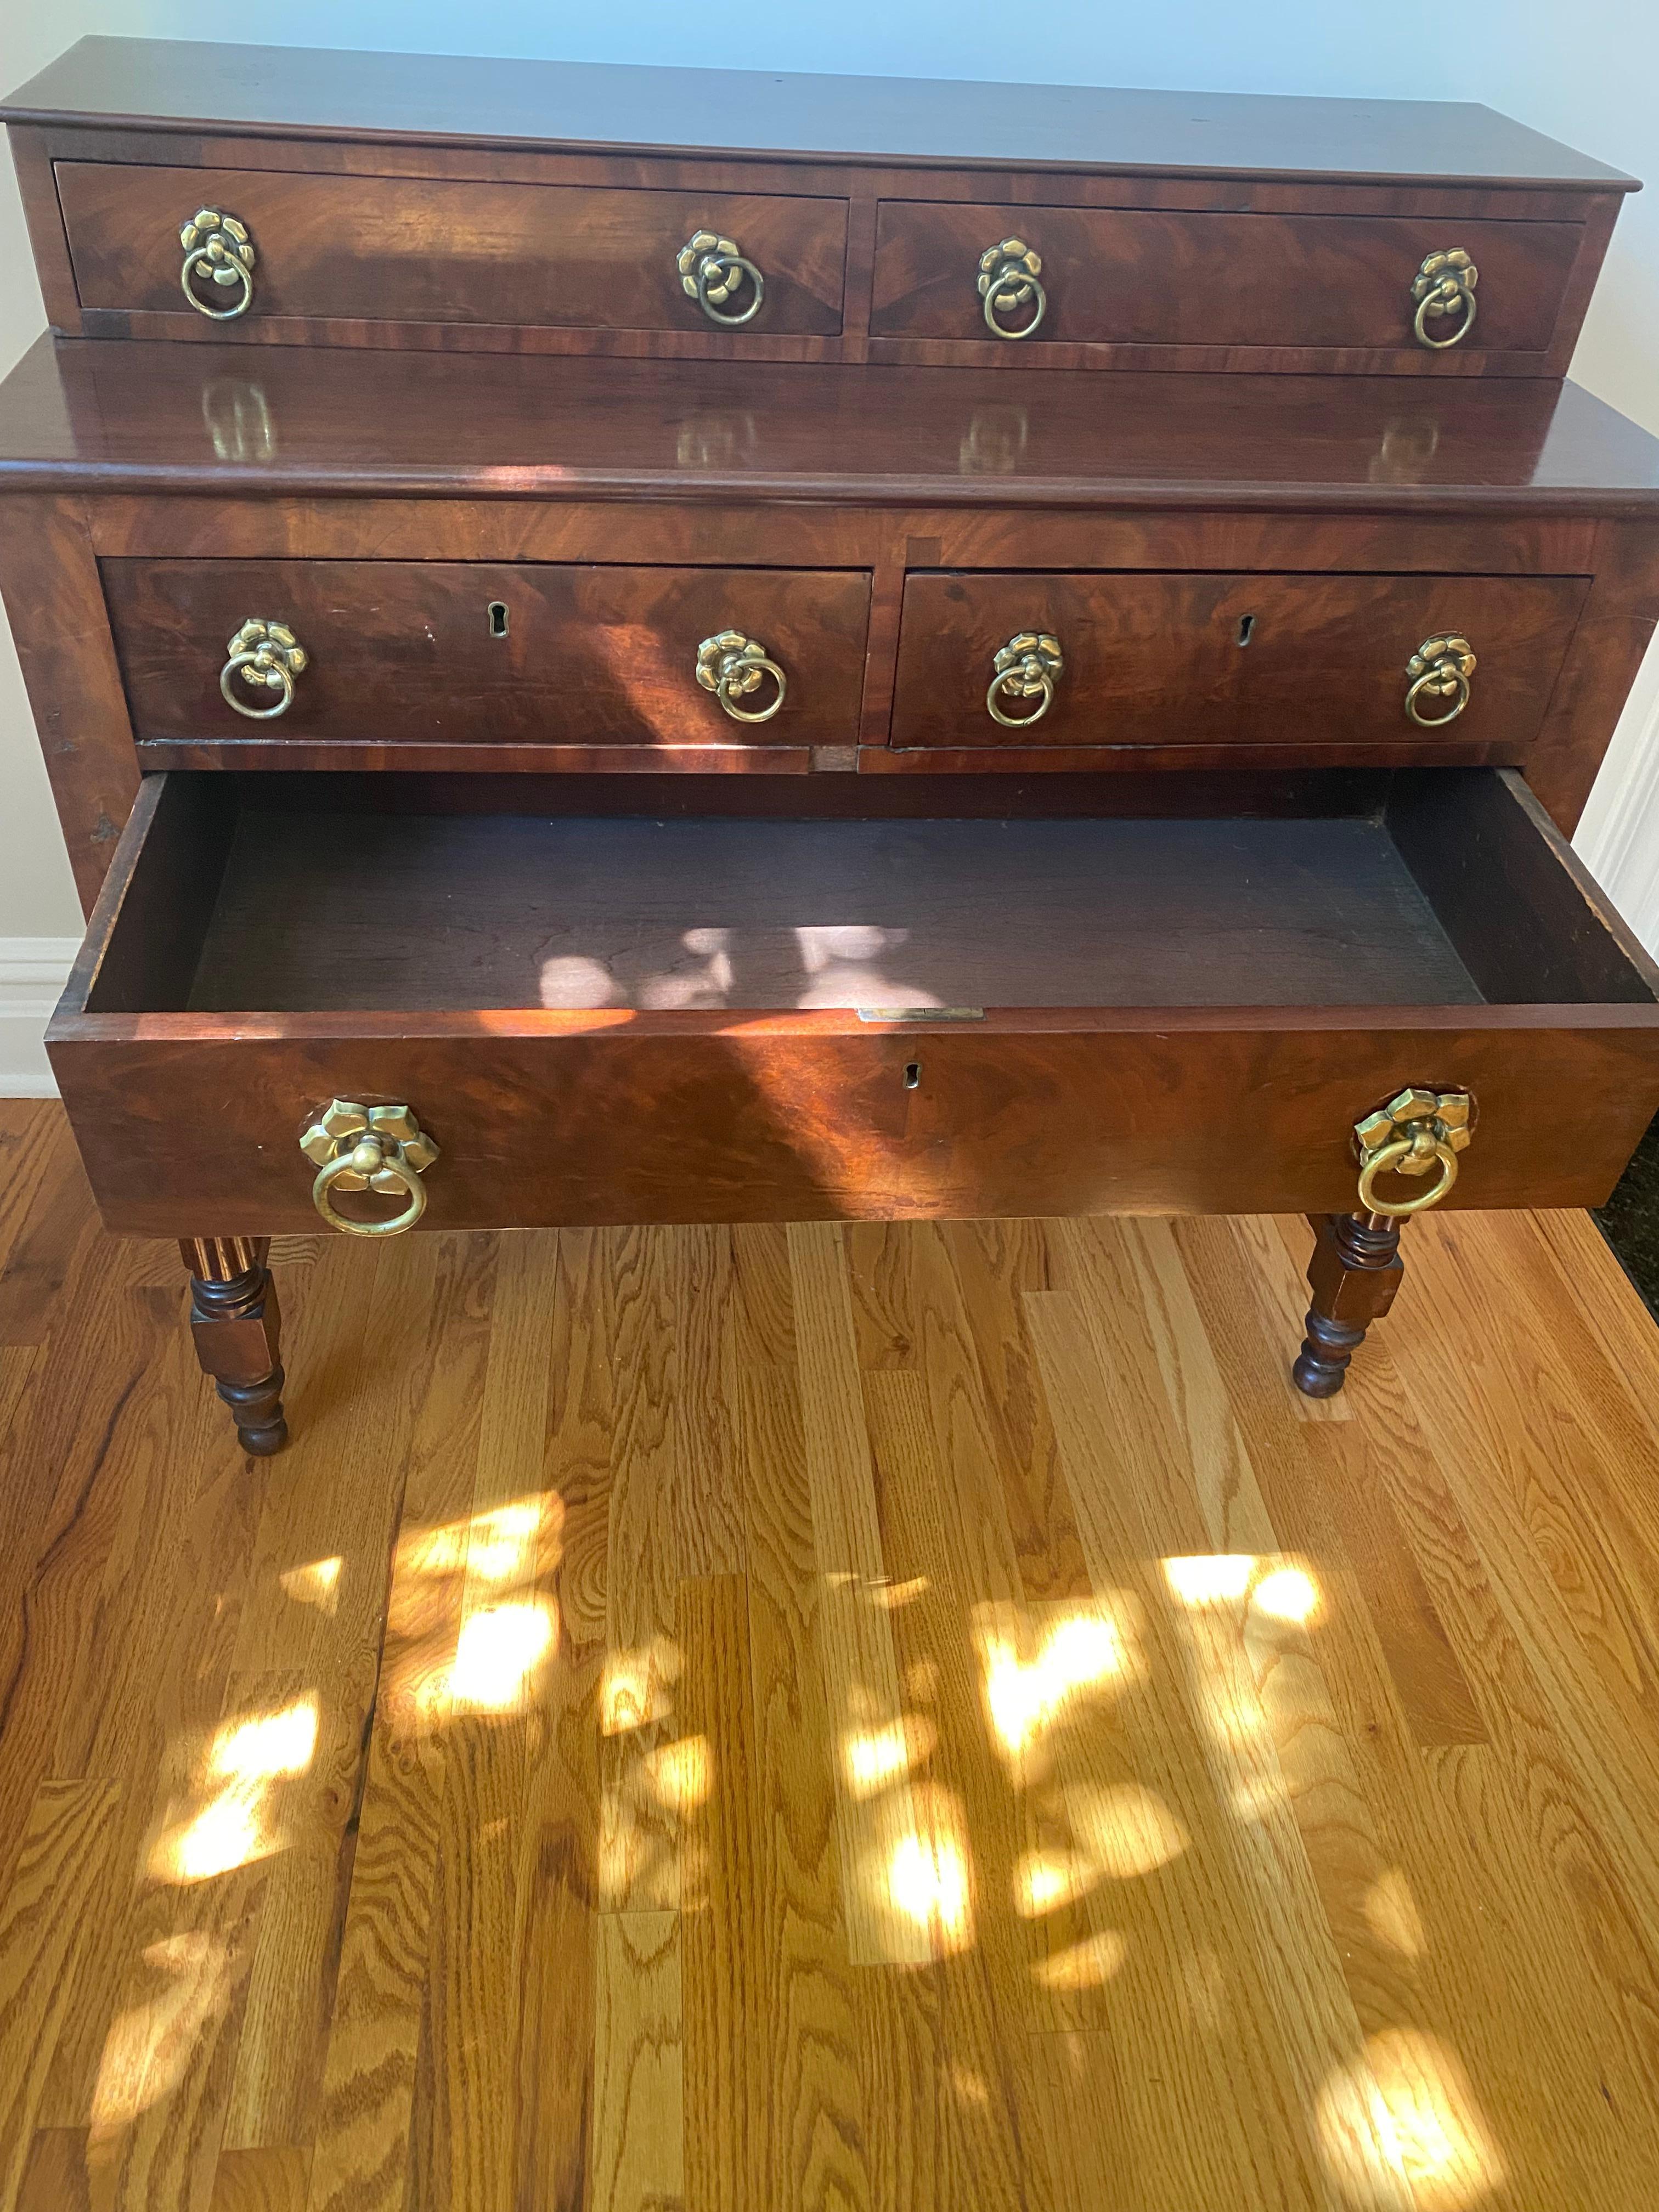 Lovely antique 19th century mahogany American Empire sideboard having two levels. Top level has two drawers; bottom section has two smaller drawers over one large drawer. Beautiful original brasses and pretty turned legs with stretcher.